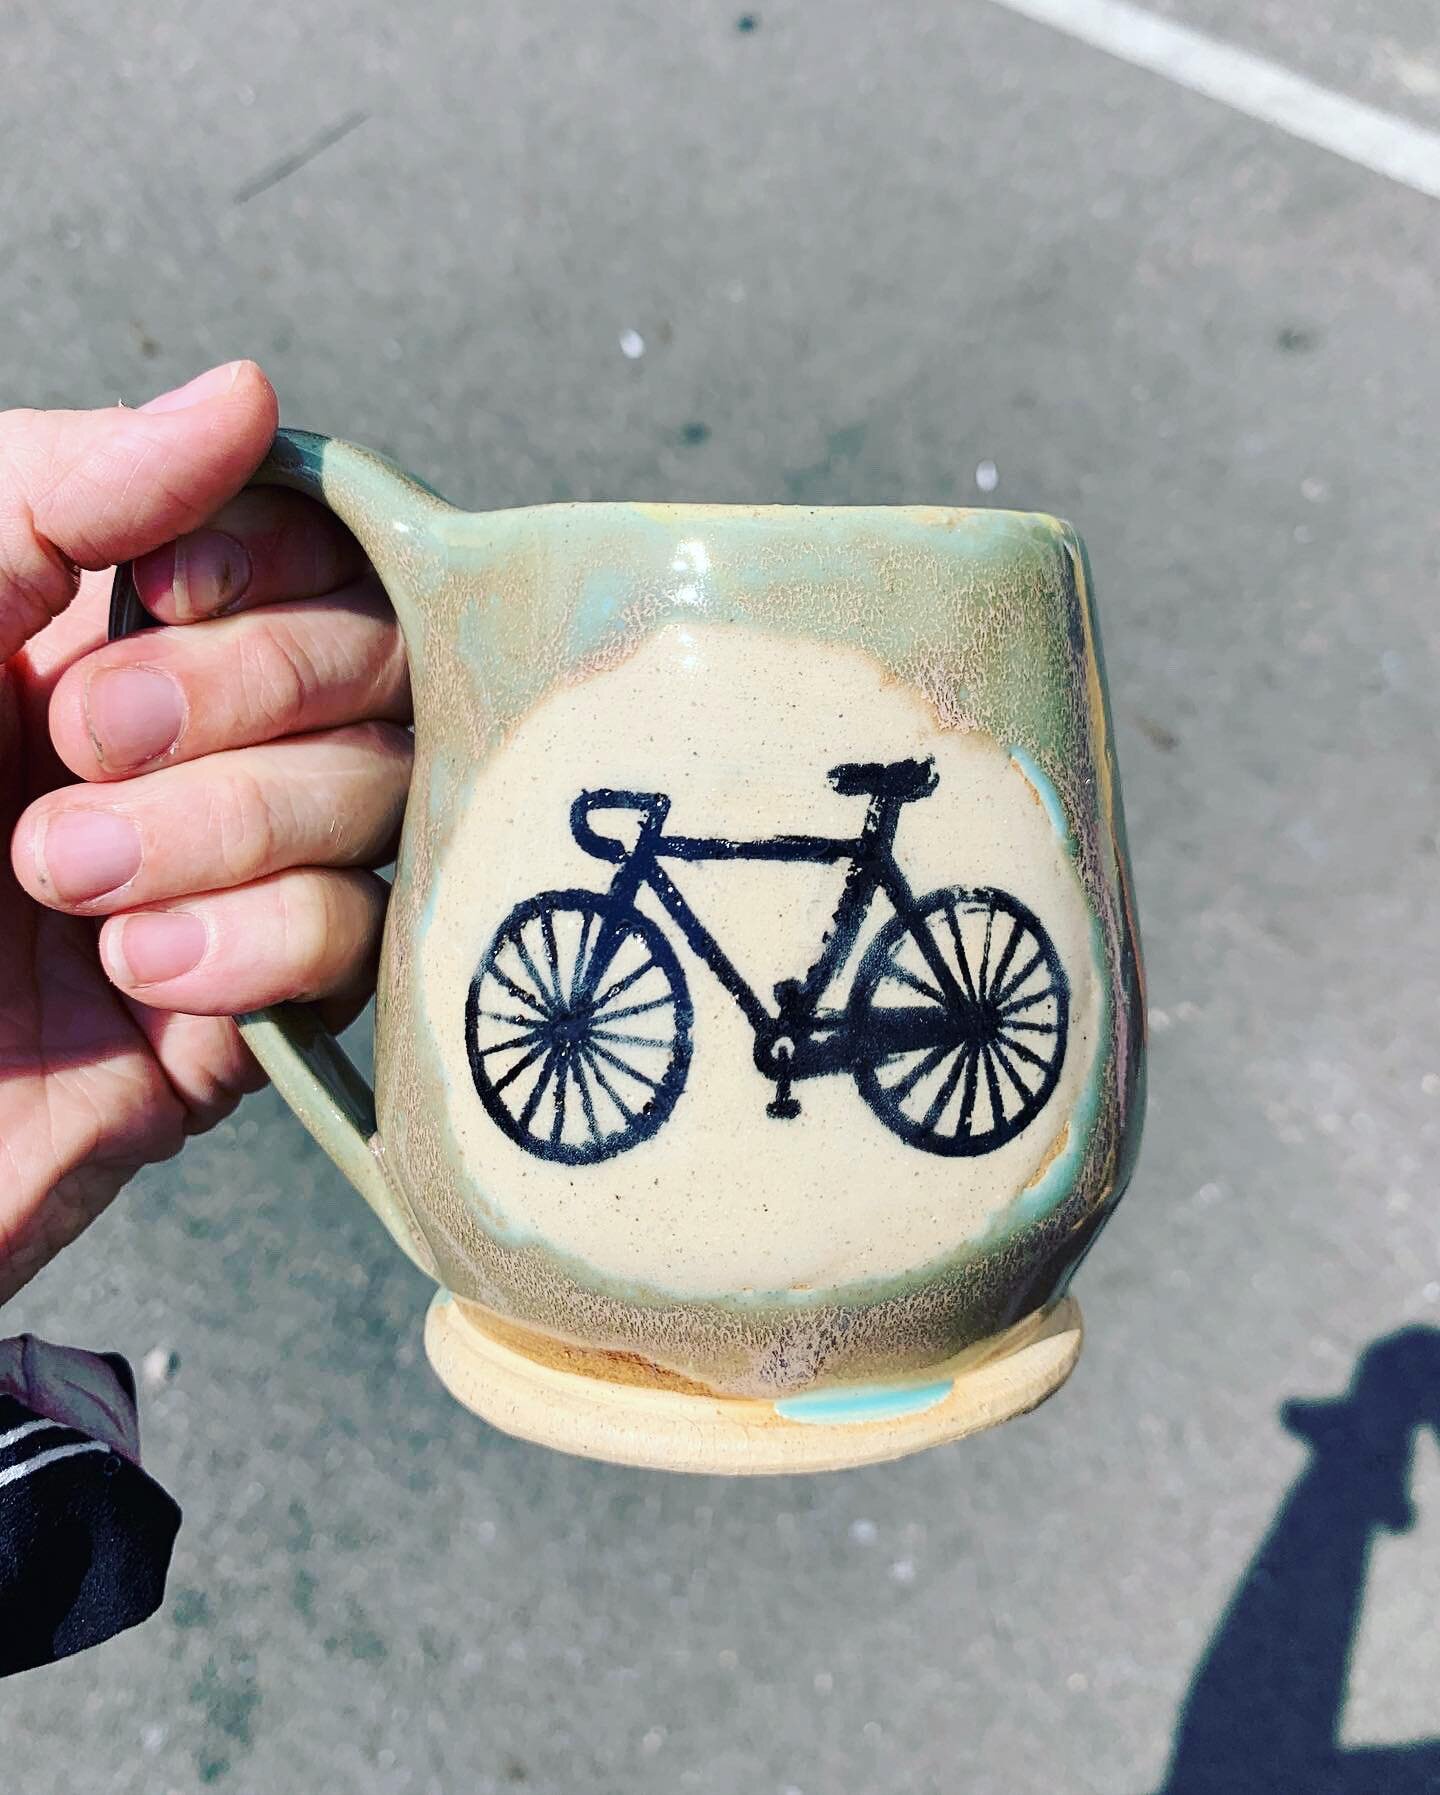 Made some bike mugs specially for the @pelotonia ride today! We&rsquo;re set up @brewdognewalbany 🚴&zwj;♀️🚴🚴&zwj;♂️
Congrats to all the riders today!  Hope everyone is staying cool (sort of) and staying hydrated.